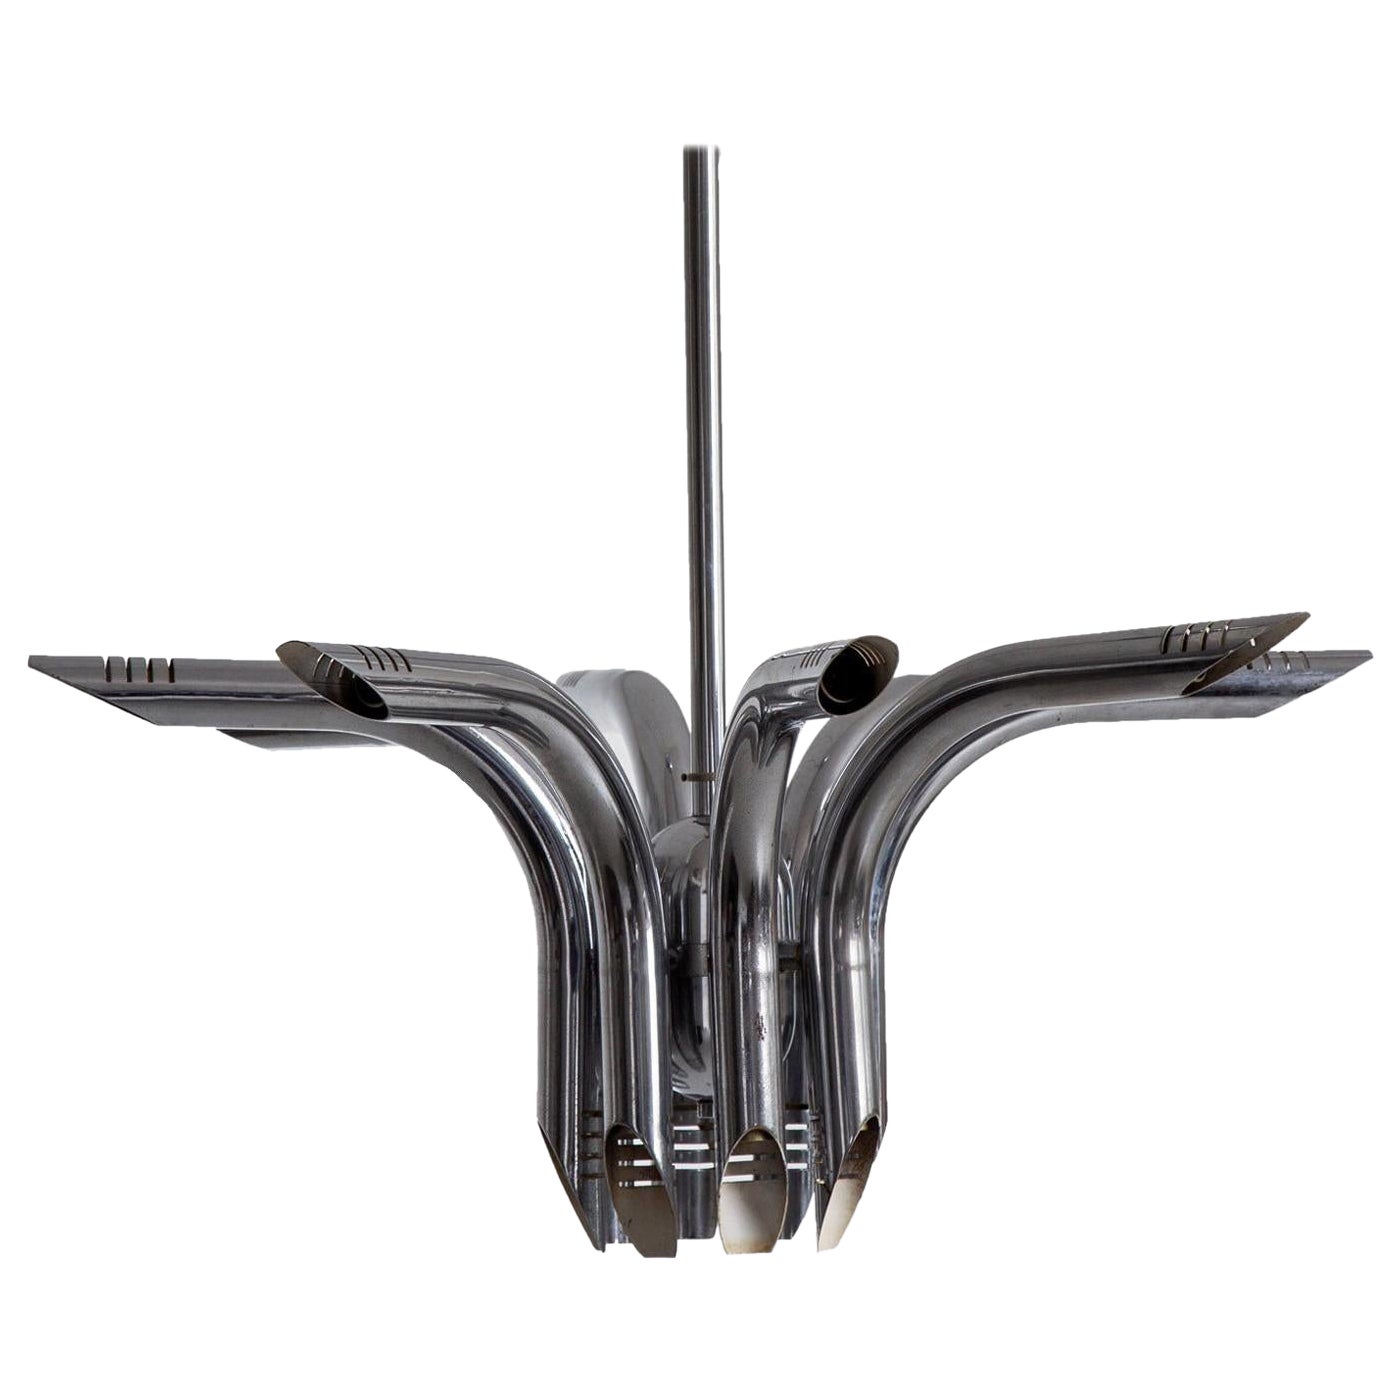 Vintage Chromed Steel Pipes Pendant Chandelier, Contemporary Industrial Style For Sale